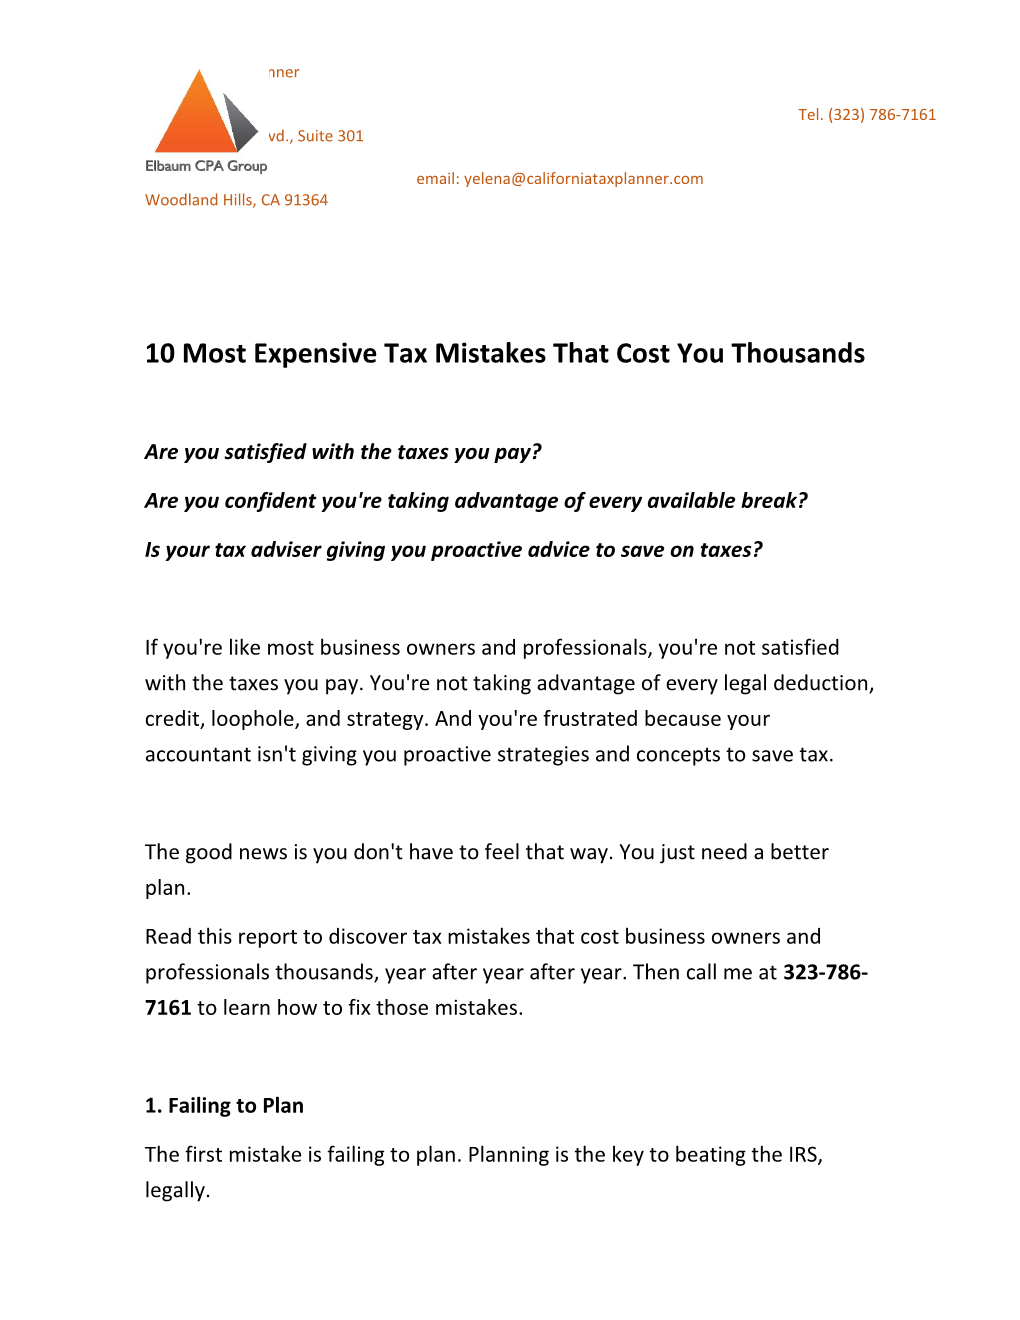 10 Most Expensive Tax Mistakes That Cost You Thousands